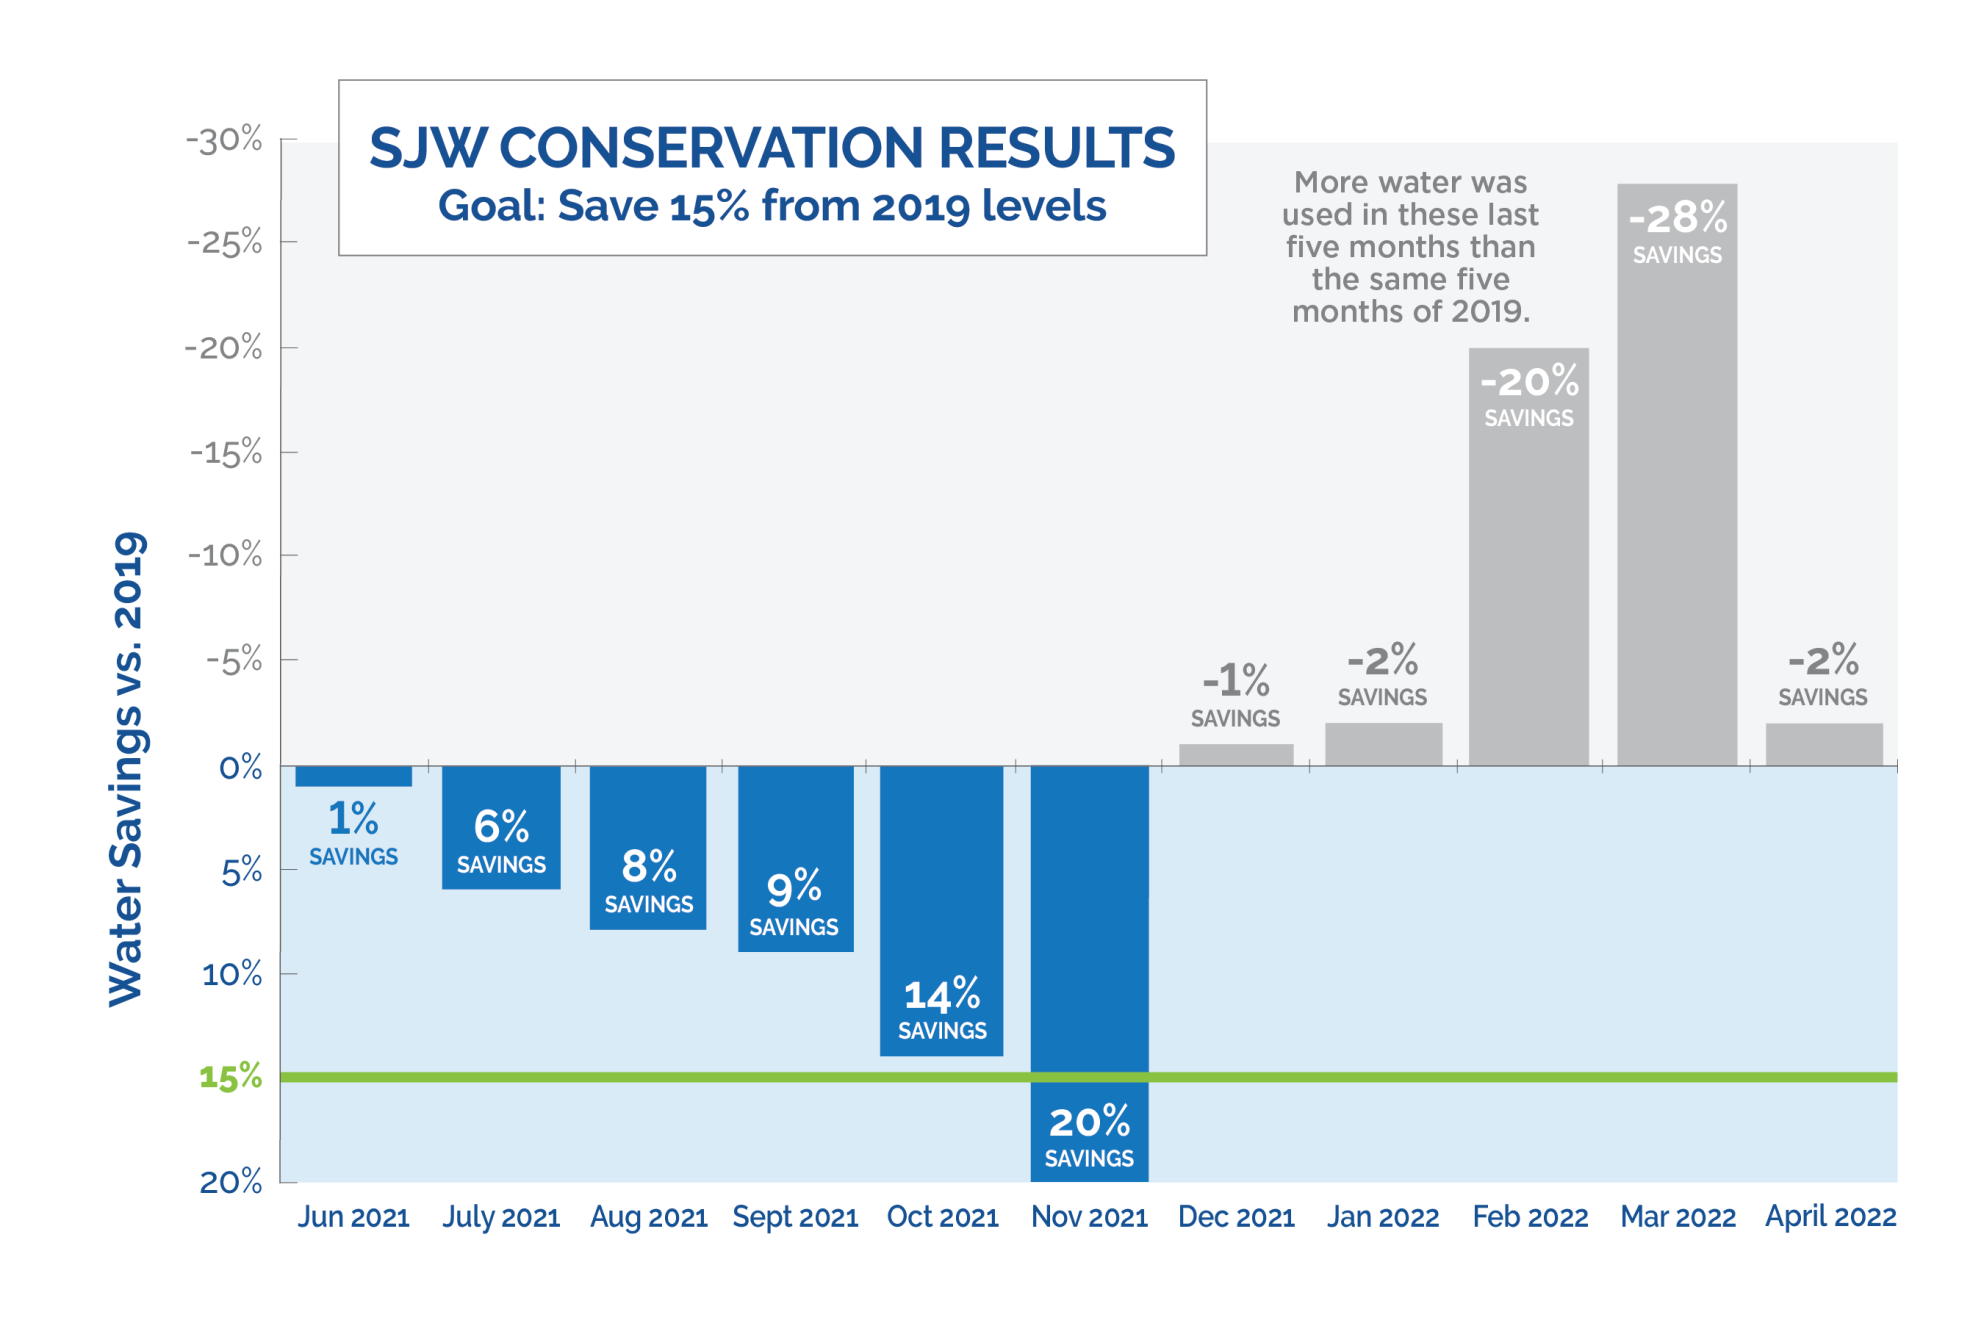 April 2022 Conservation Chart shows water usage up 2%. 